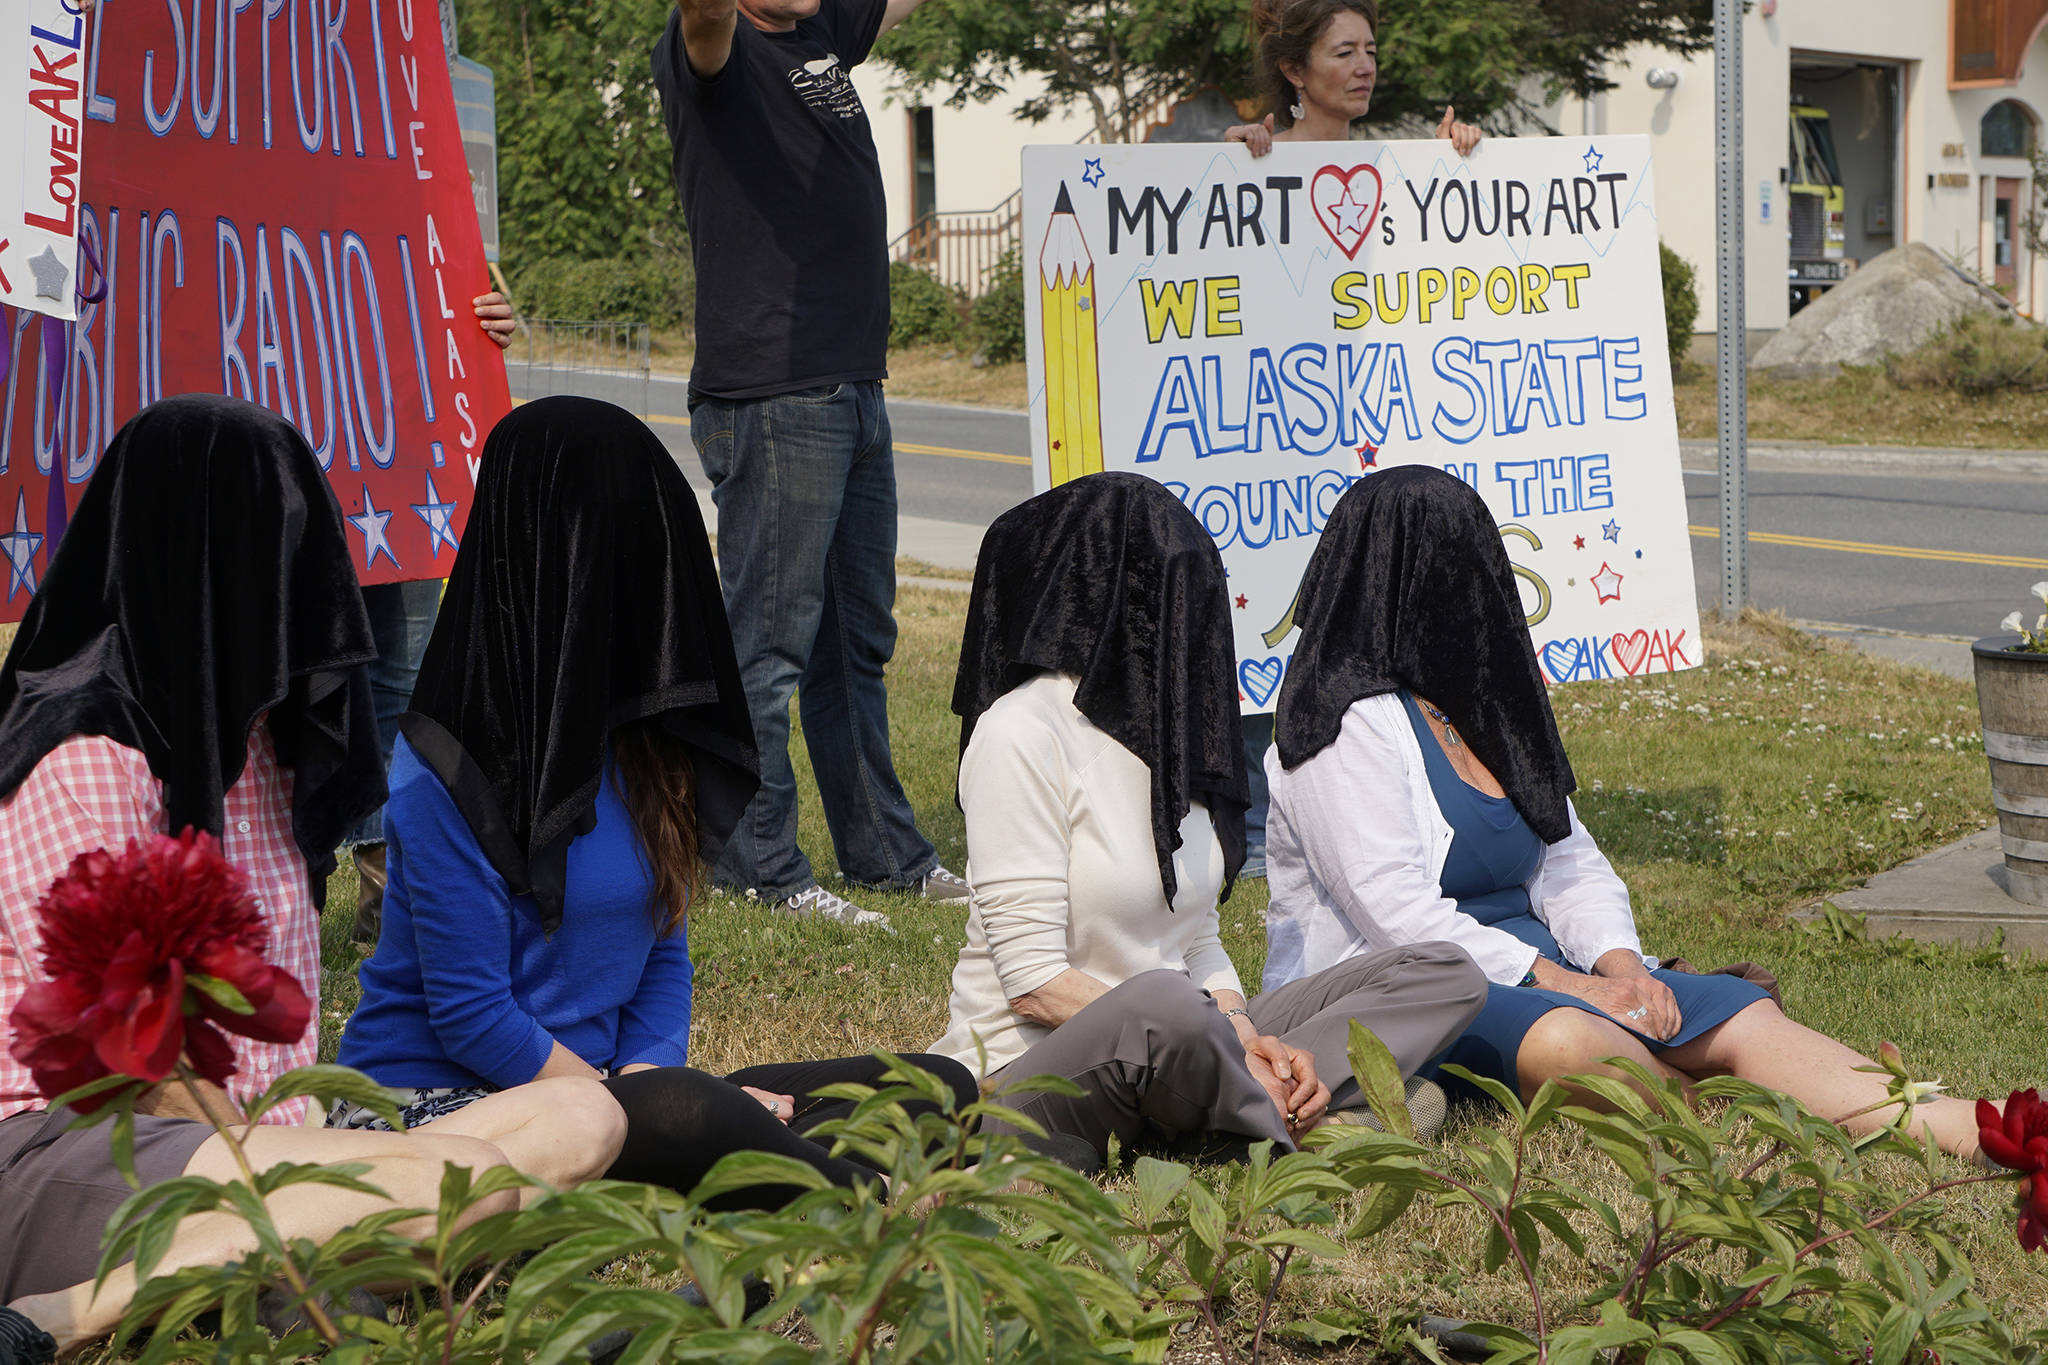 Women draped in black sit down on July 9, 2019, at WKFL Park in Homer, Alaska, as part of a statewide art intervention to protest Gov. Mike Dunleavy’s veto of a $2.8 million state appropriation to the Alaska State Council on the Arts. They also supported a general override of Dunleavy’s vetoes that will affect funding for the University of Alaska, public radio and other programs. (Photo by Michael Armstrong/Homer News)